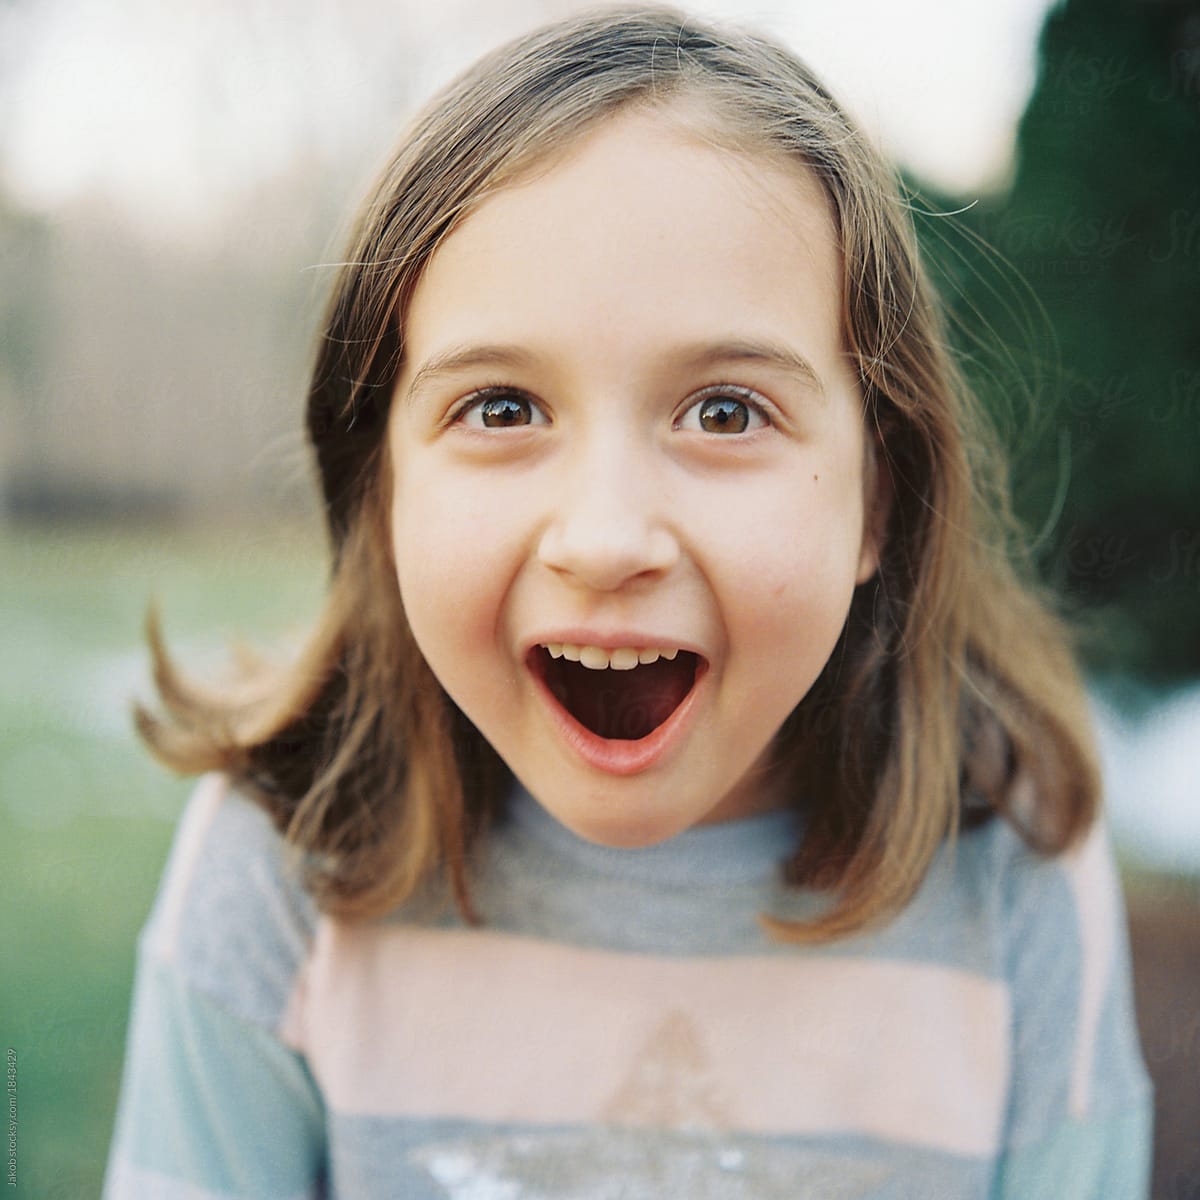 Close Up Portrait Of A Young Girl Looking Surprised By Stocksy Contributor Jakob Lagerstedt 